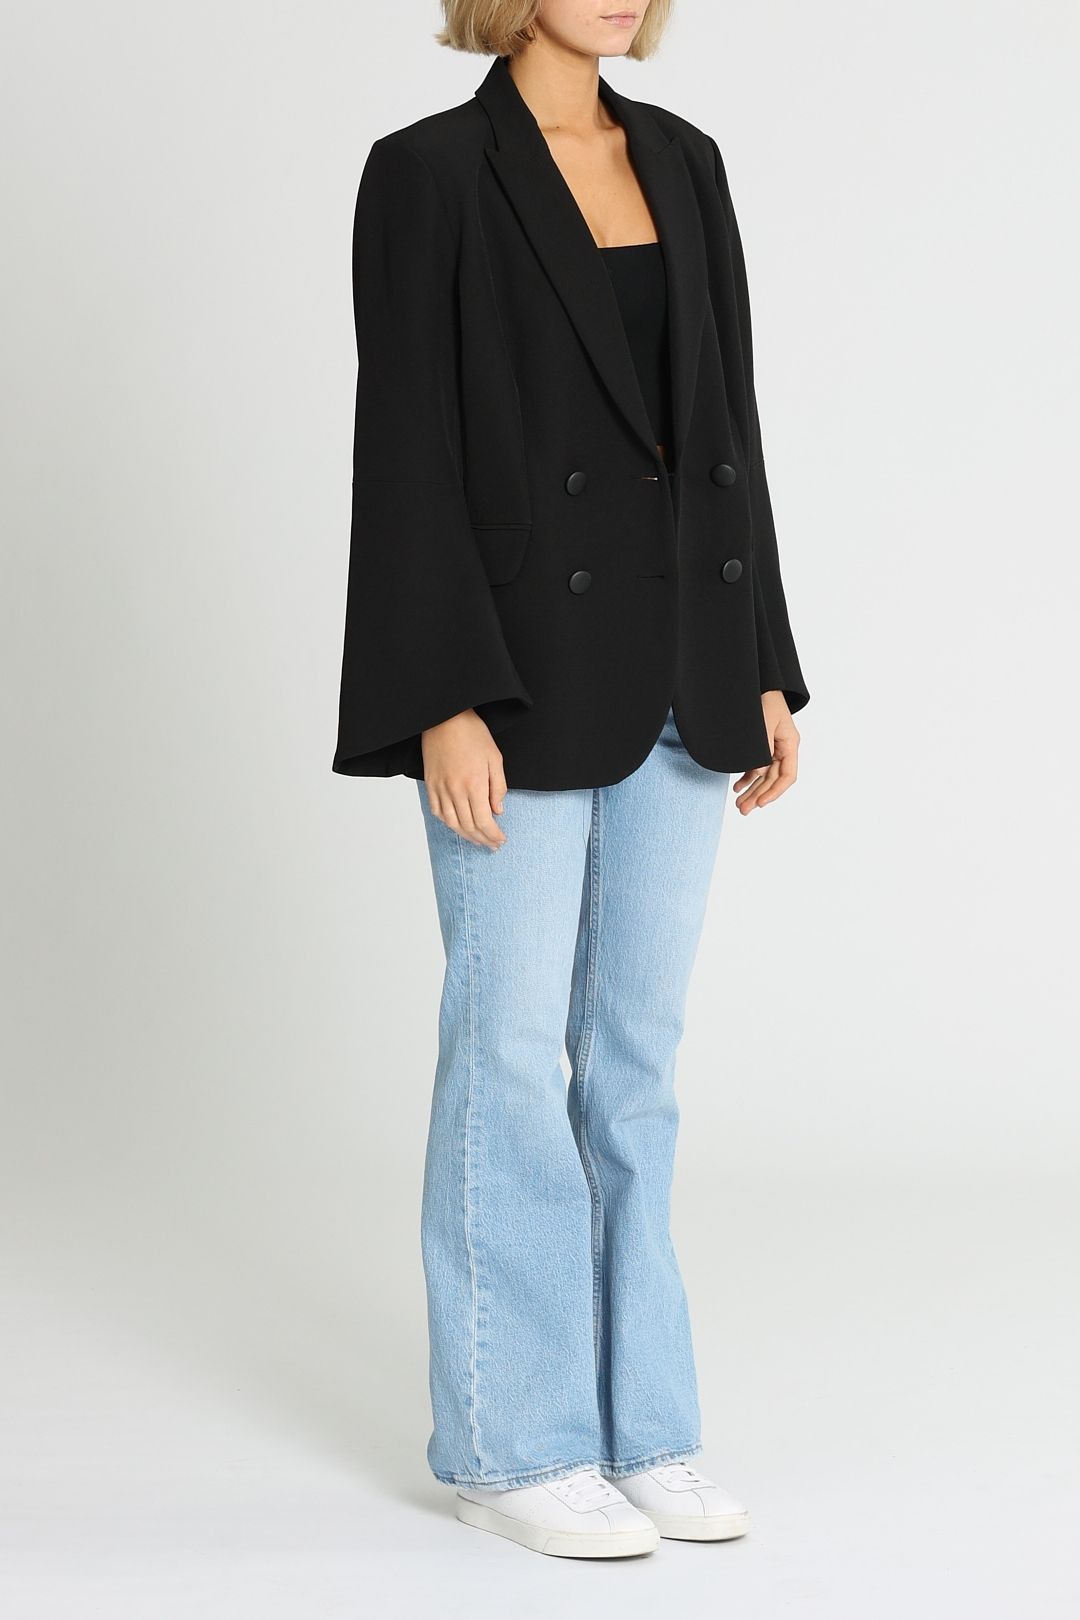 Rodeo Show Mischa Black Blazer Jacket Relaxed Fit